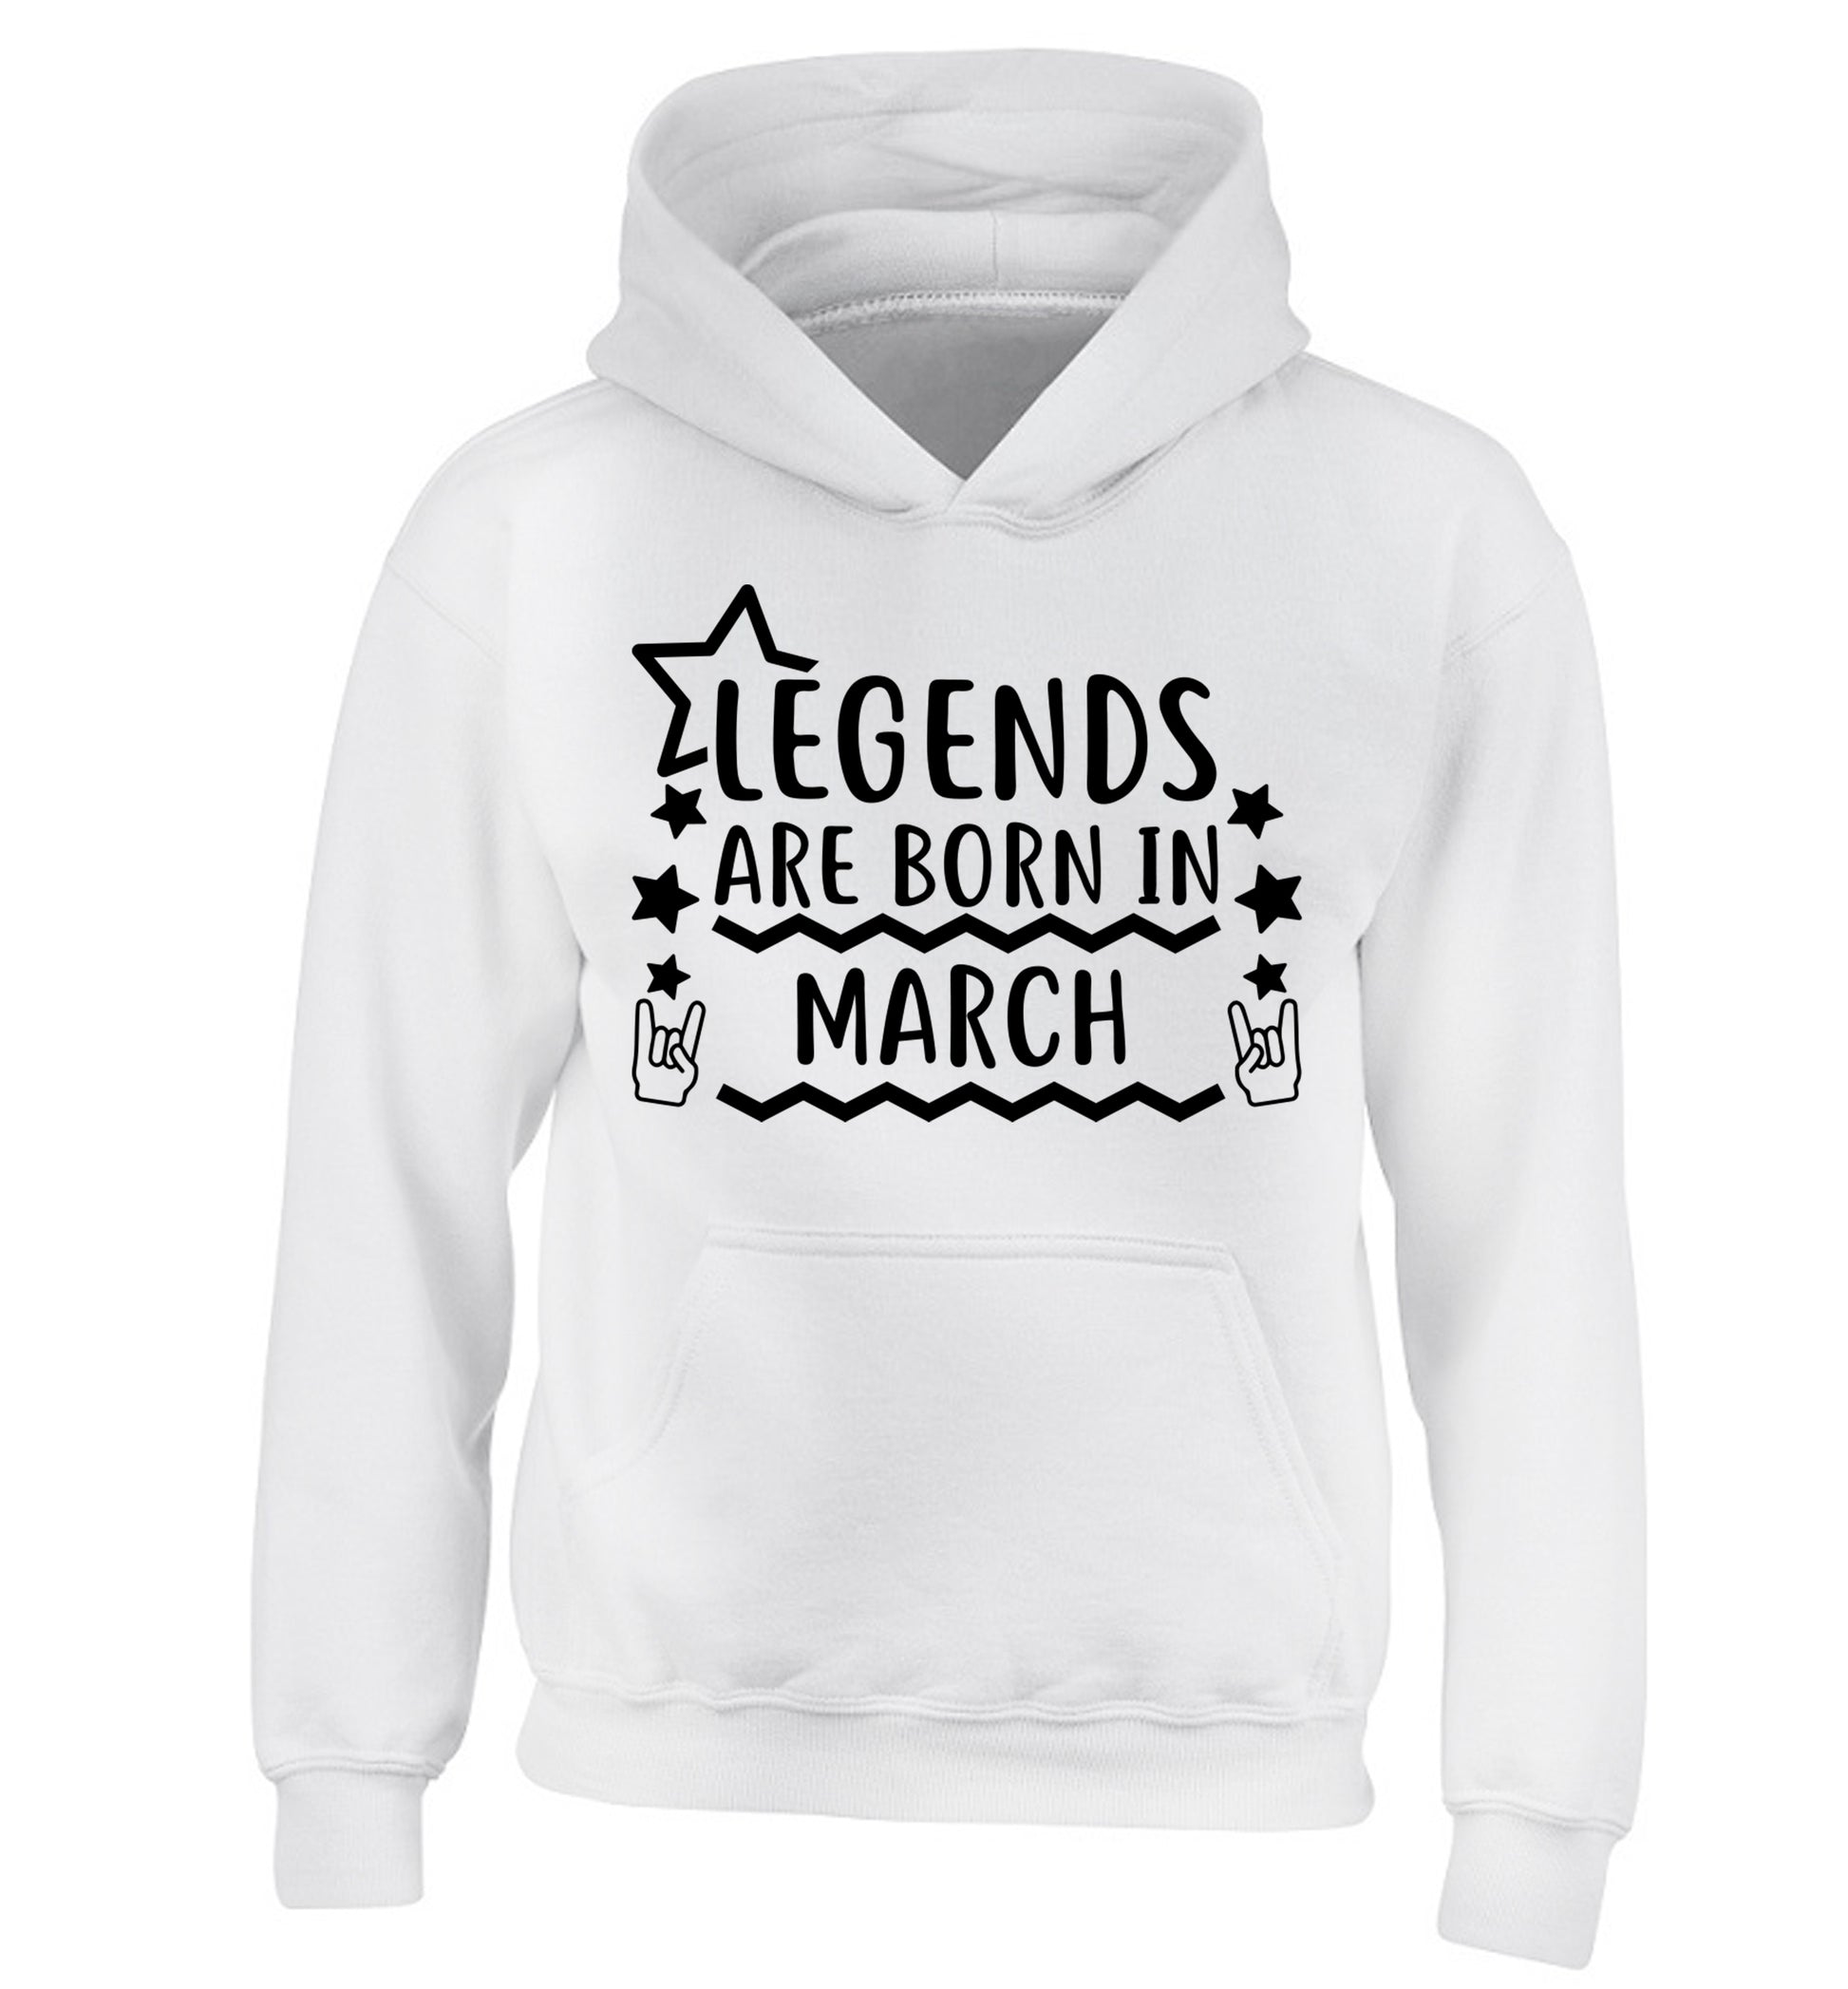 Legends are born in March children's white hoodie 12-13 Years